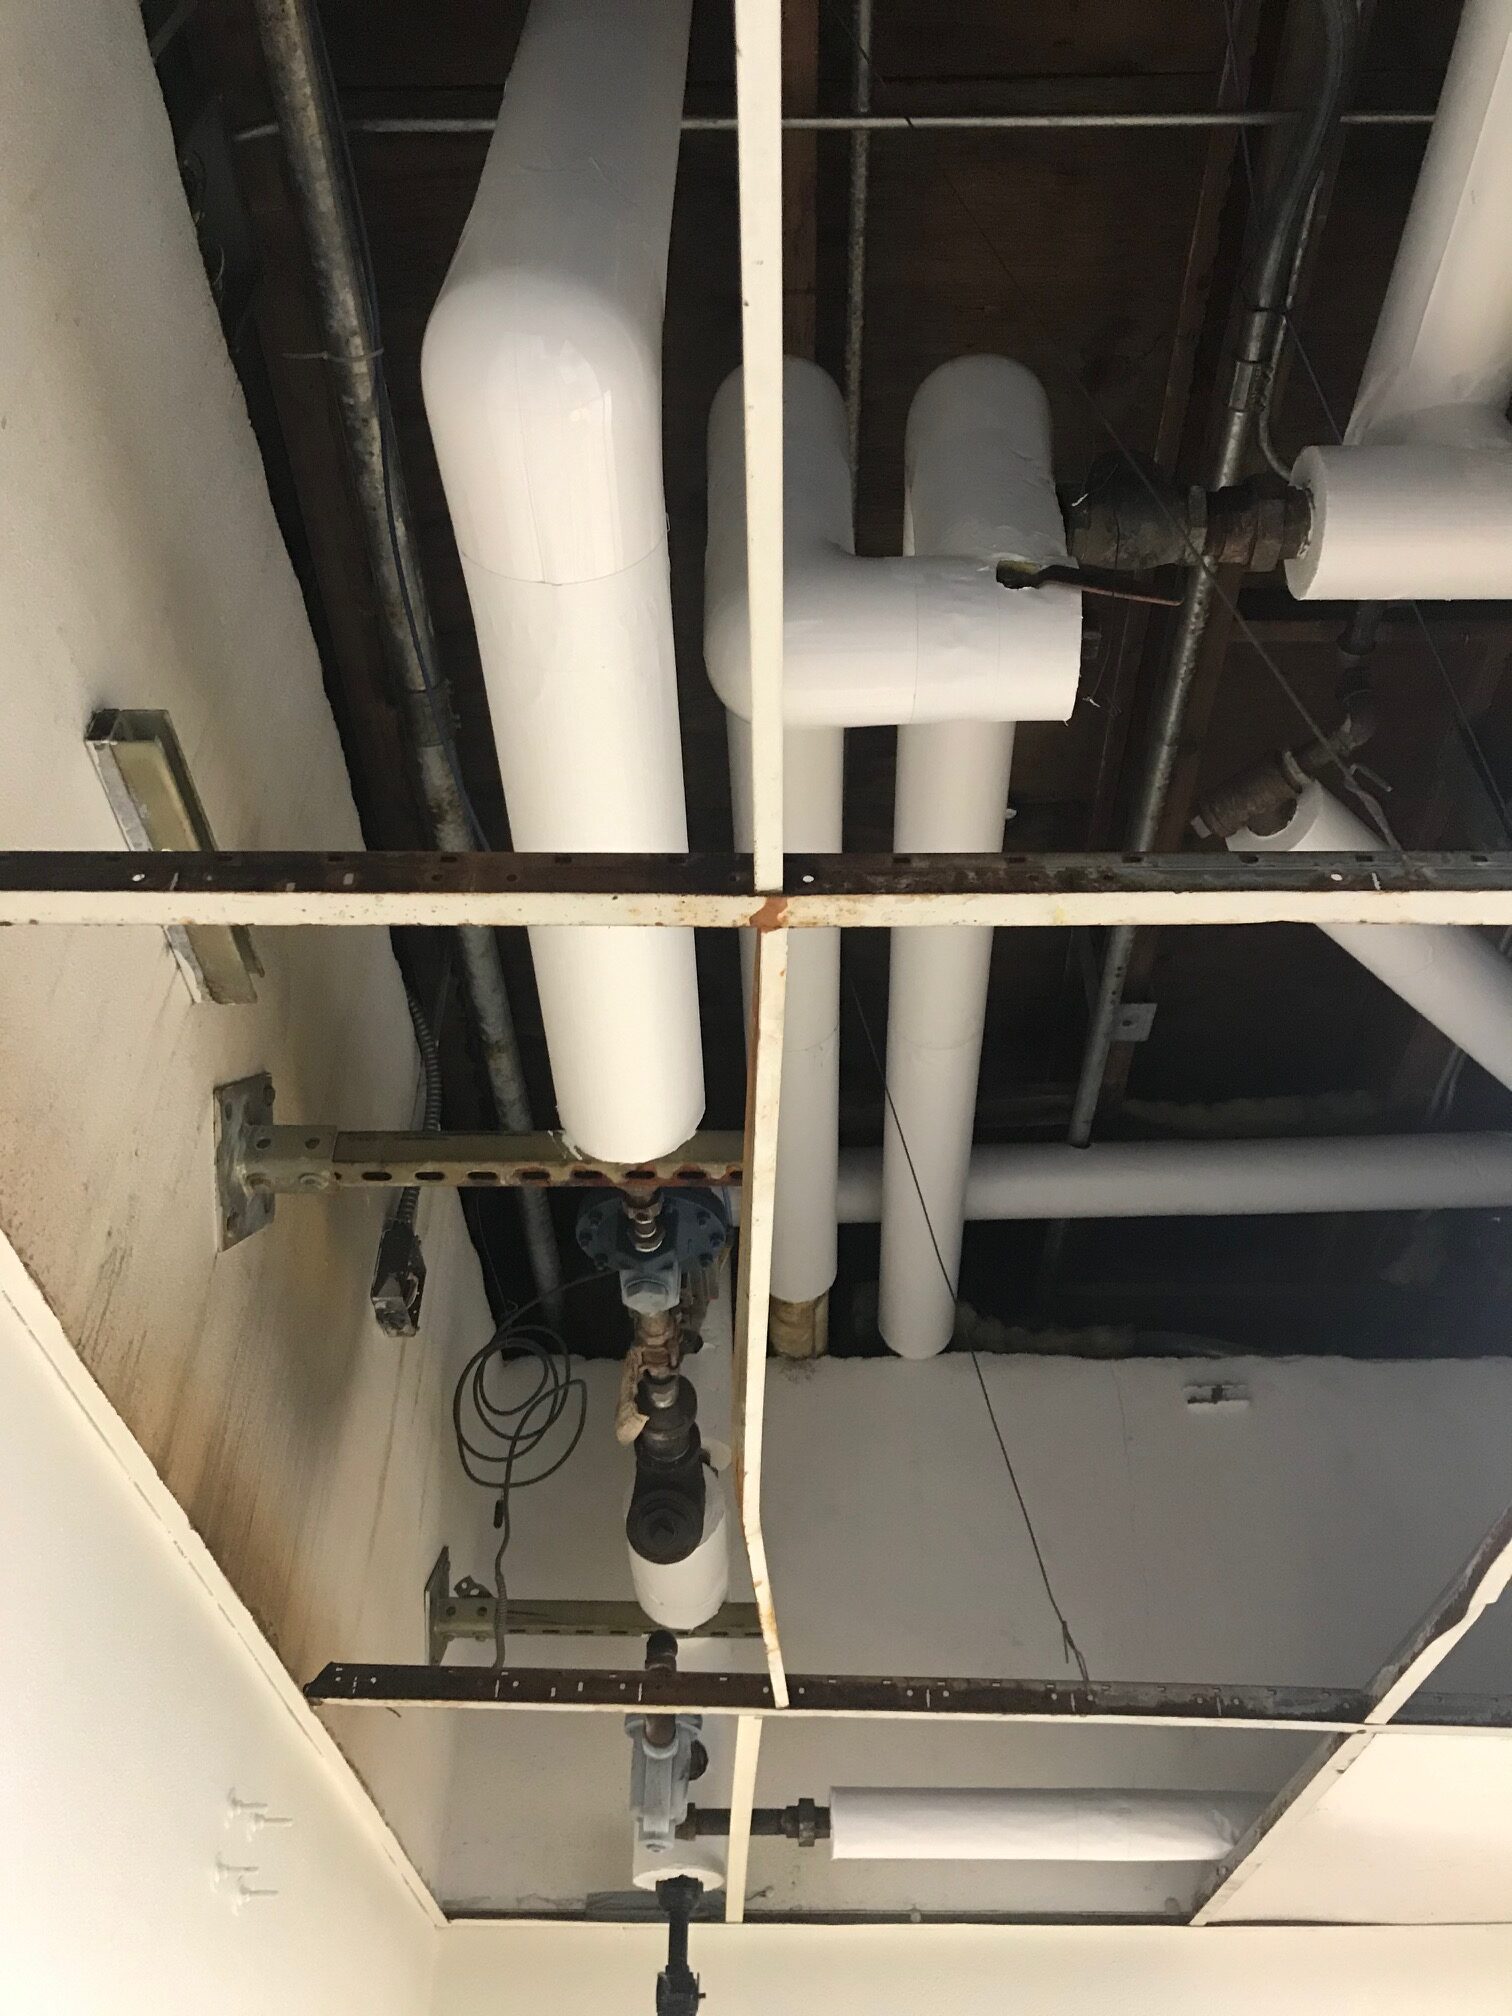 insulated pipes in the ceiling